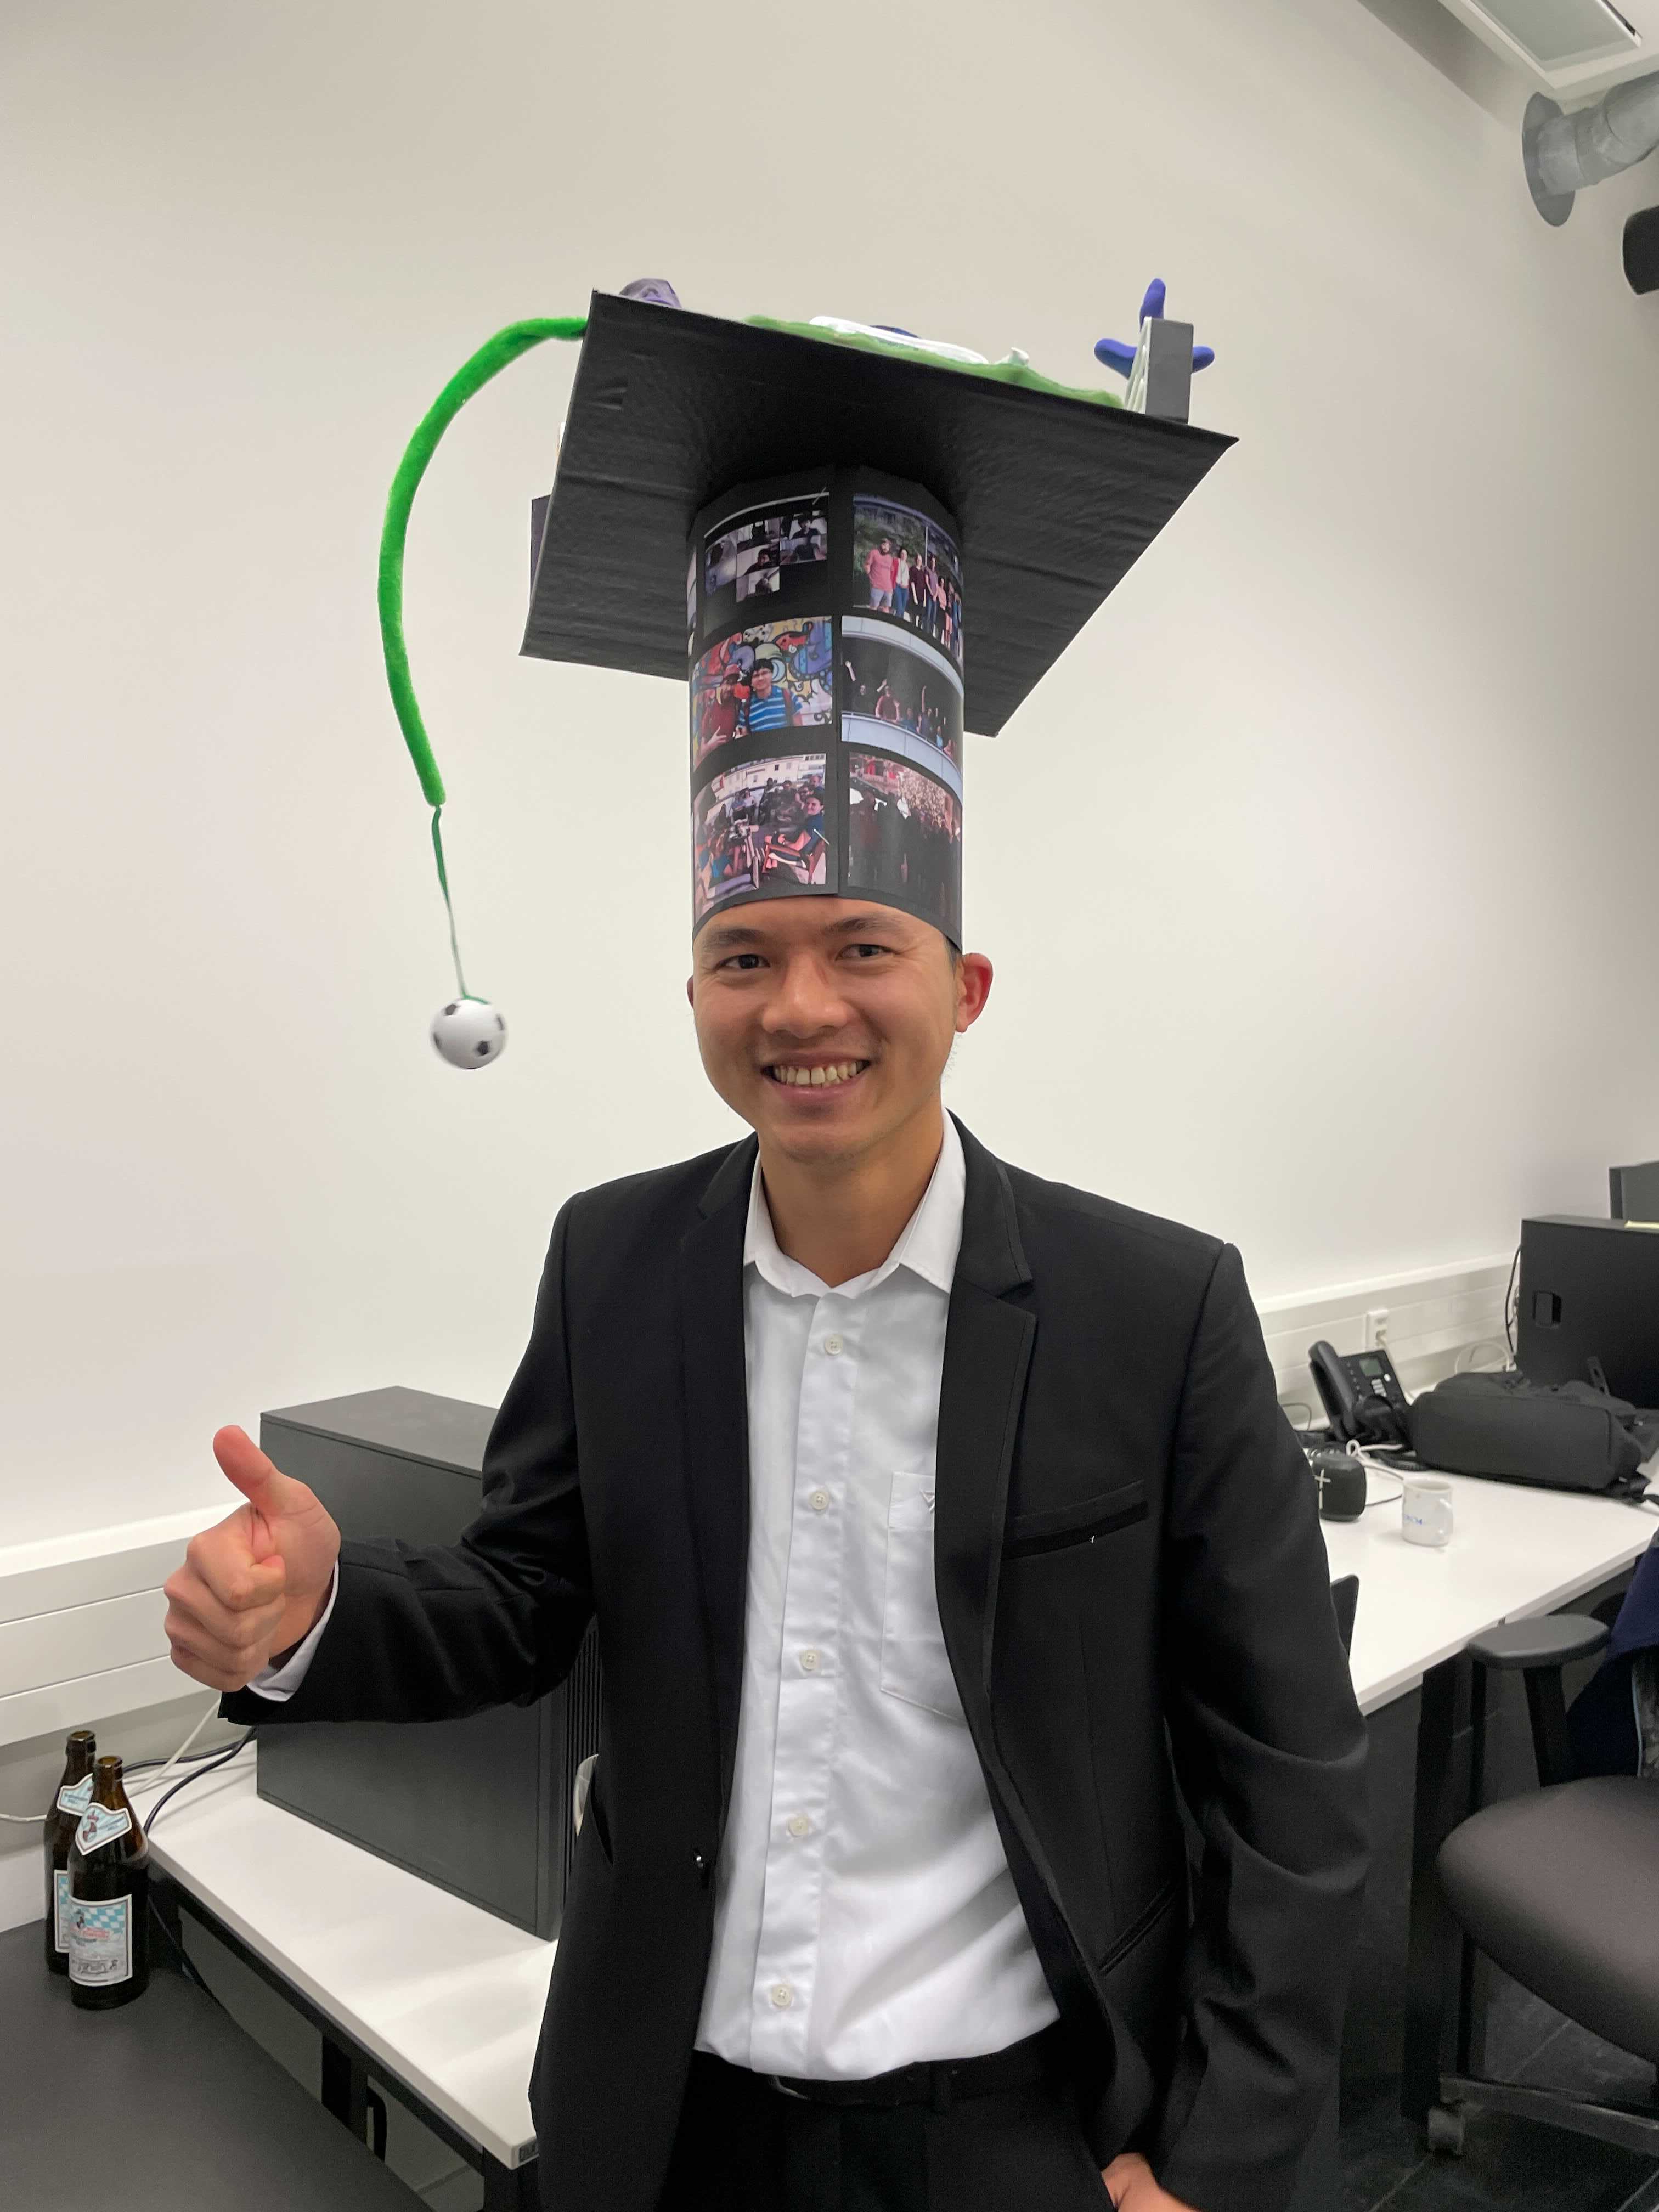 Hoan proud of XL hat after PhD defense